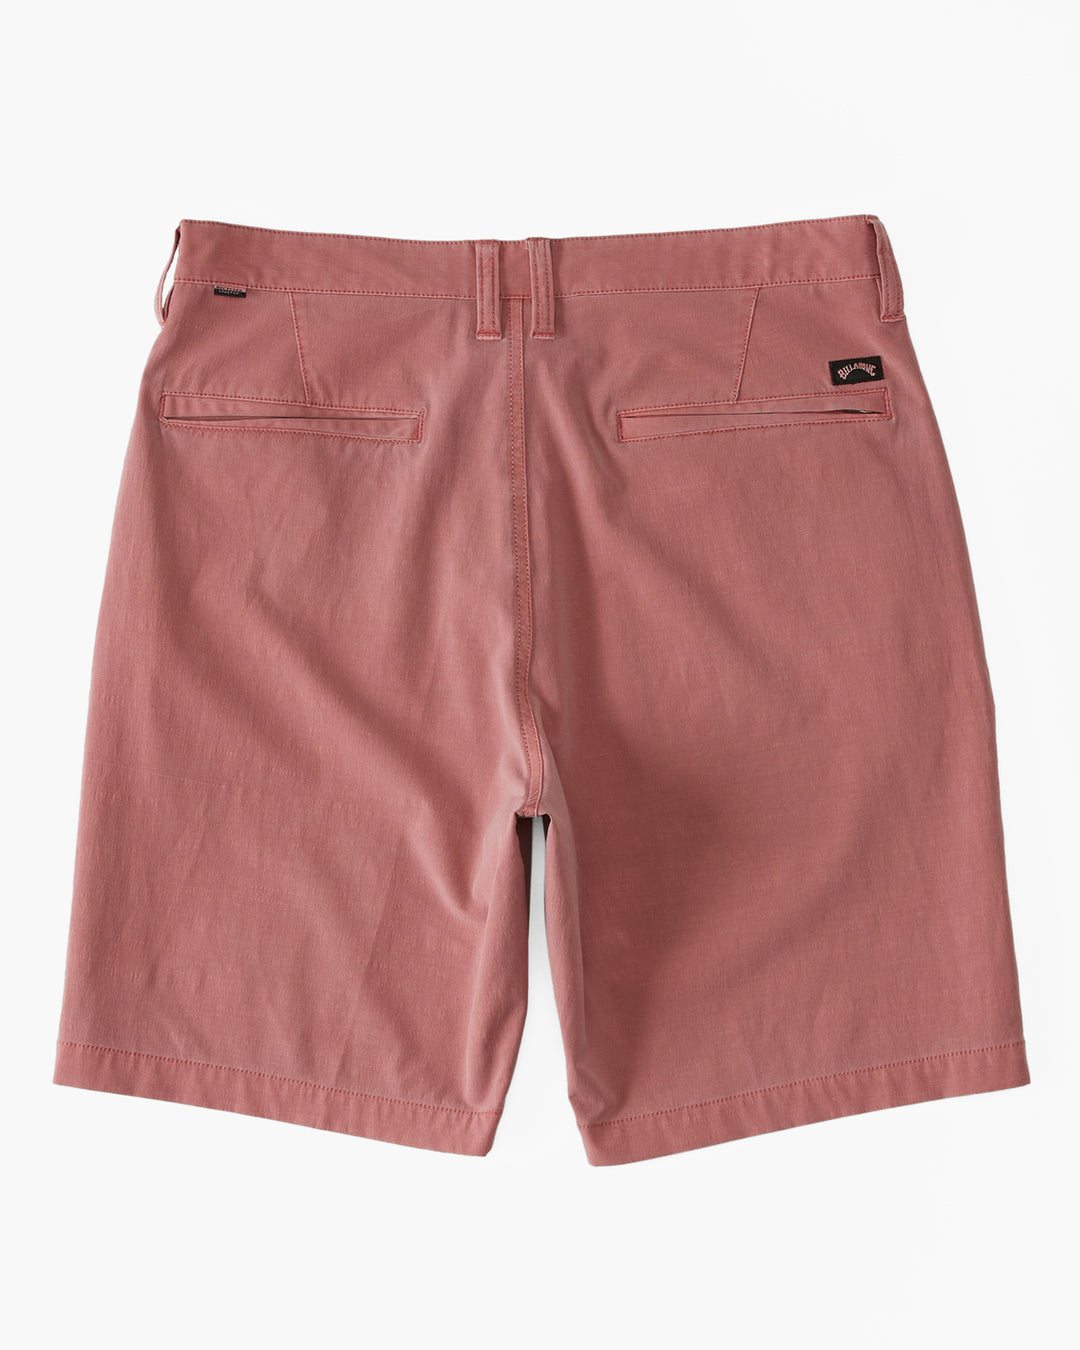 Billabong Crossfire Wave Washed 18" Hybrid Submersible Shorts - Coral - Sun Diego Boardshop